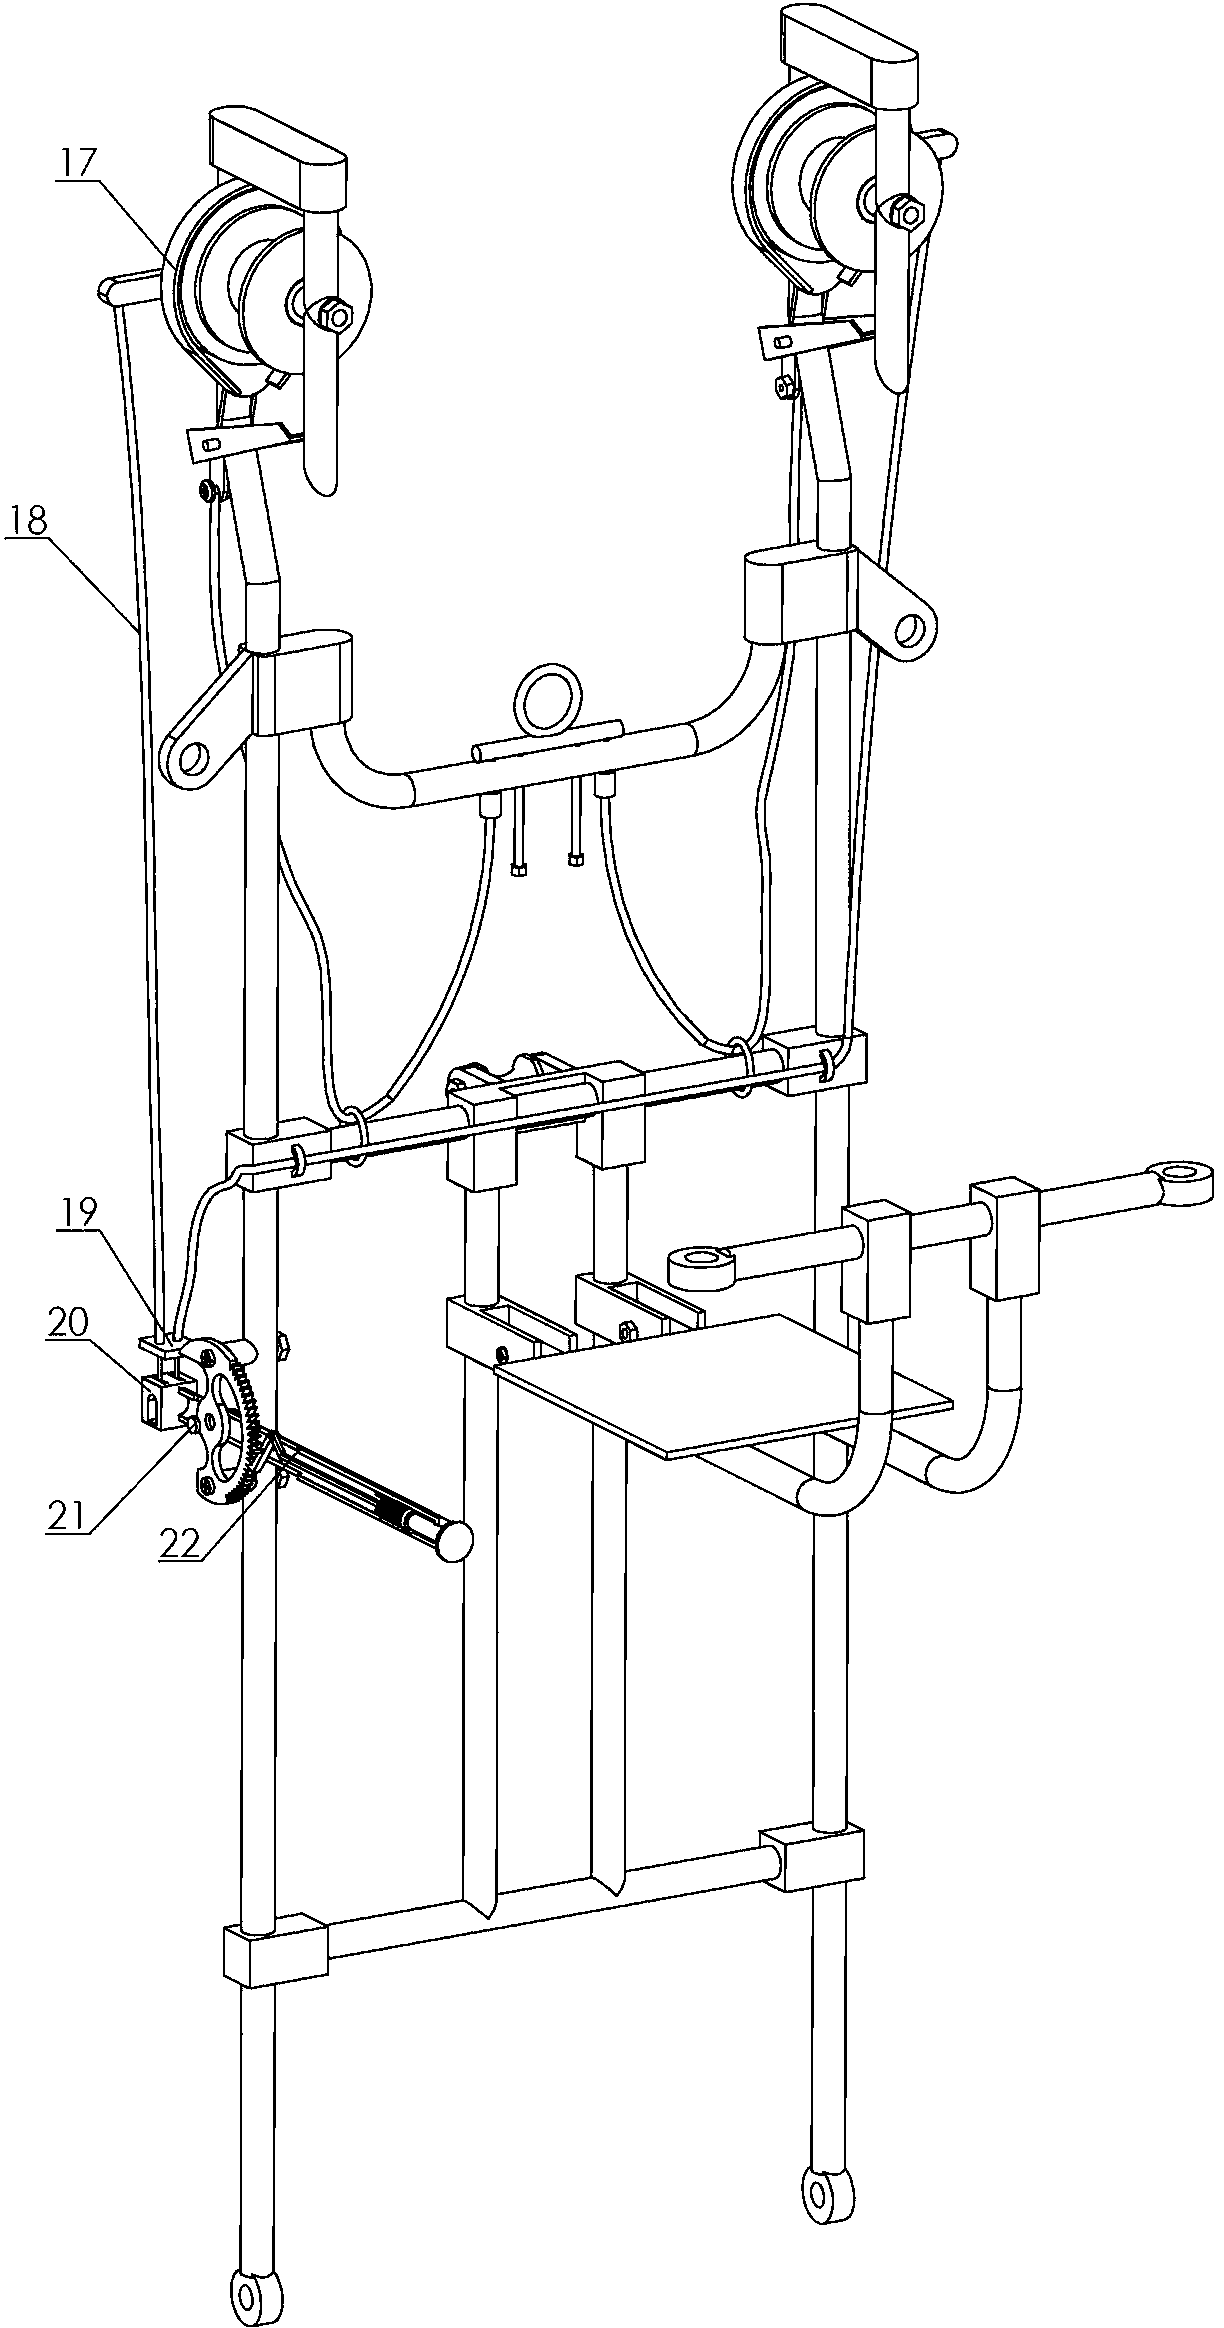 Aloft traveling device for ascending height during hot-line work